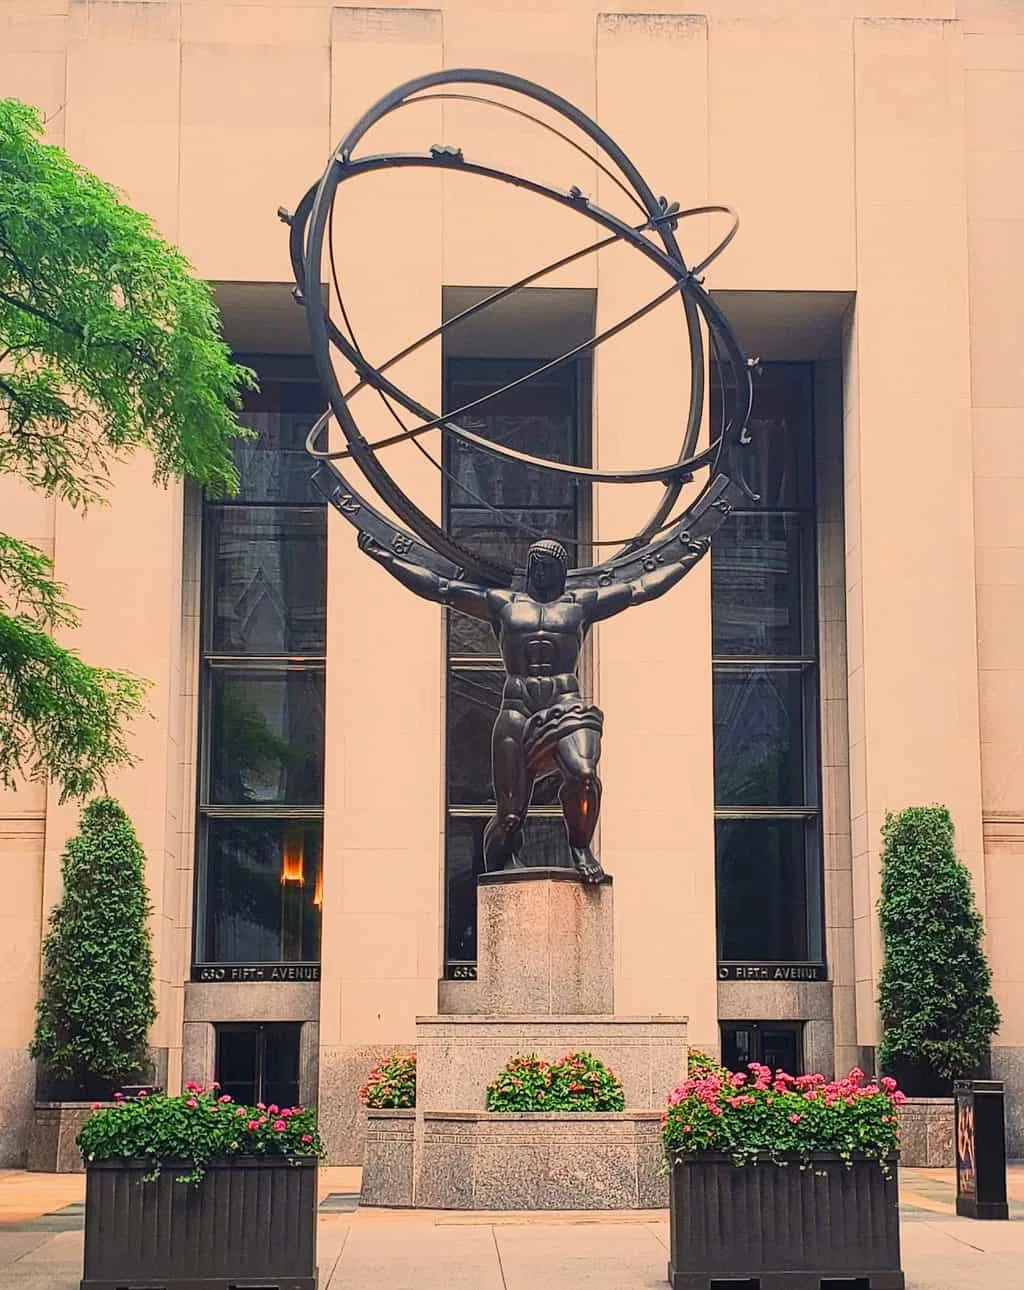 The iconic beauty of the Atlas Statue along Fifth Avenue. 